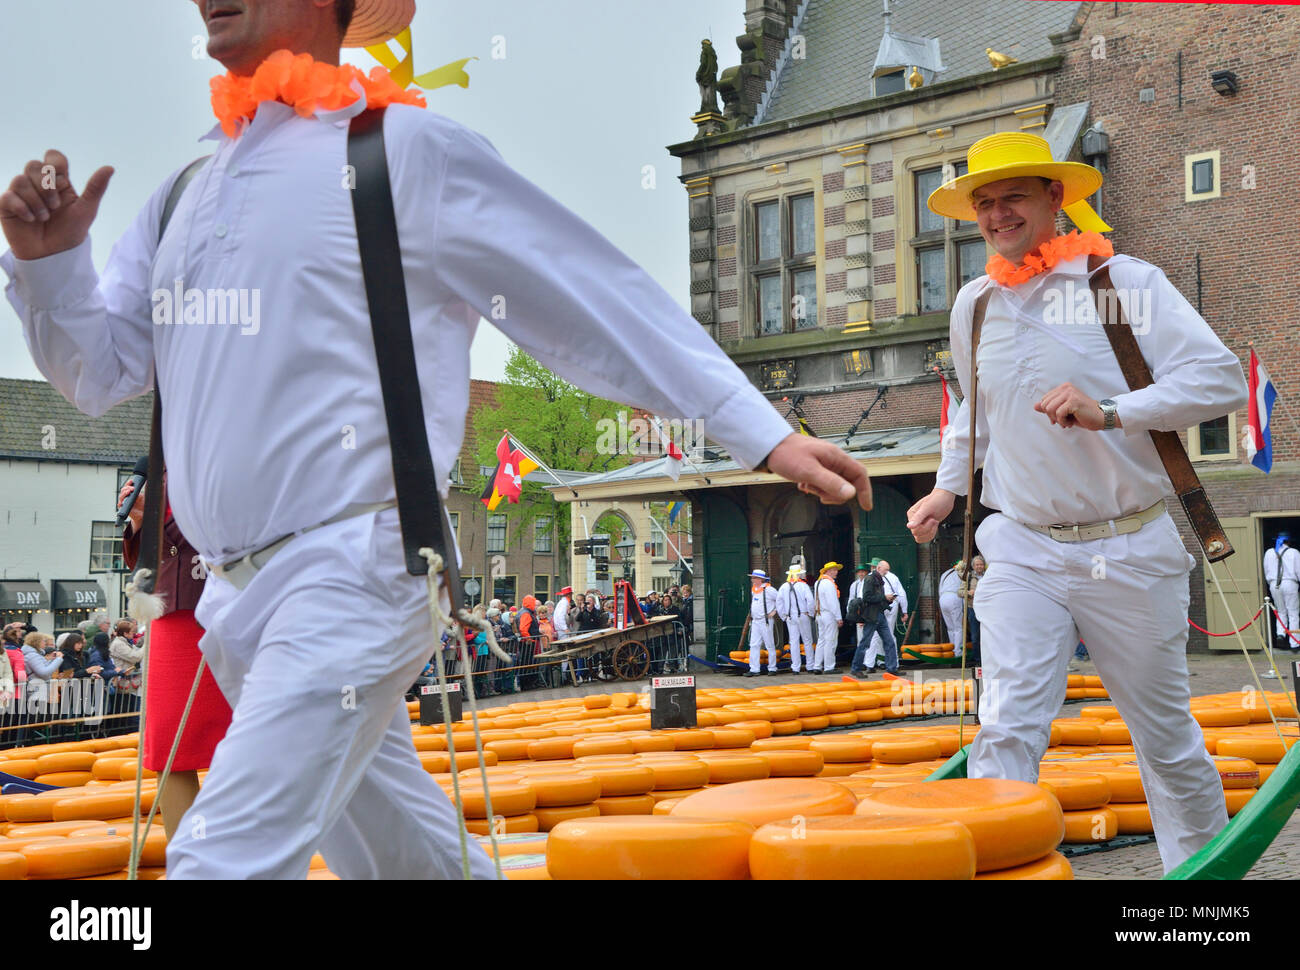 The entertaining cheese market takes place on the Waagplein in Alkmaar, Holland each week during spring and summer. Stock Photo